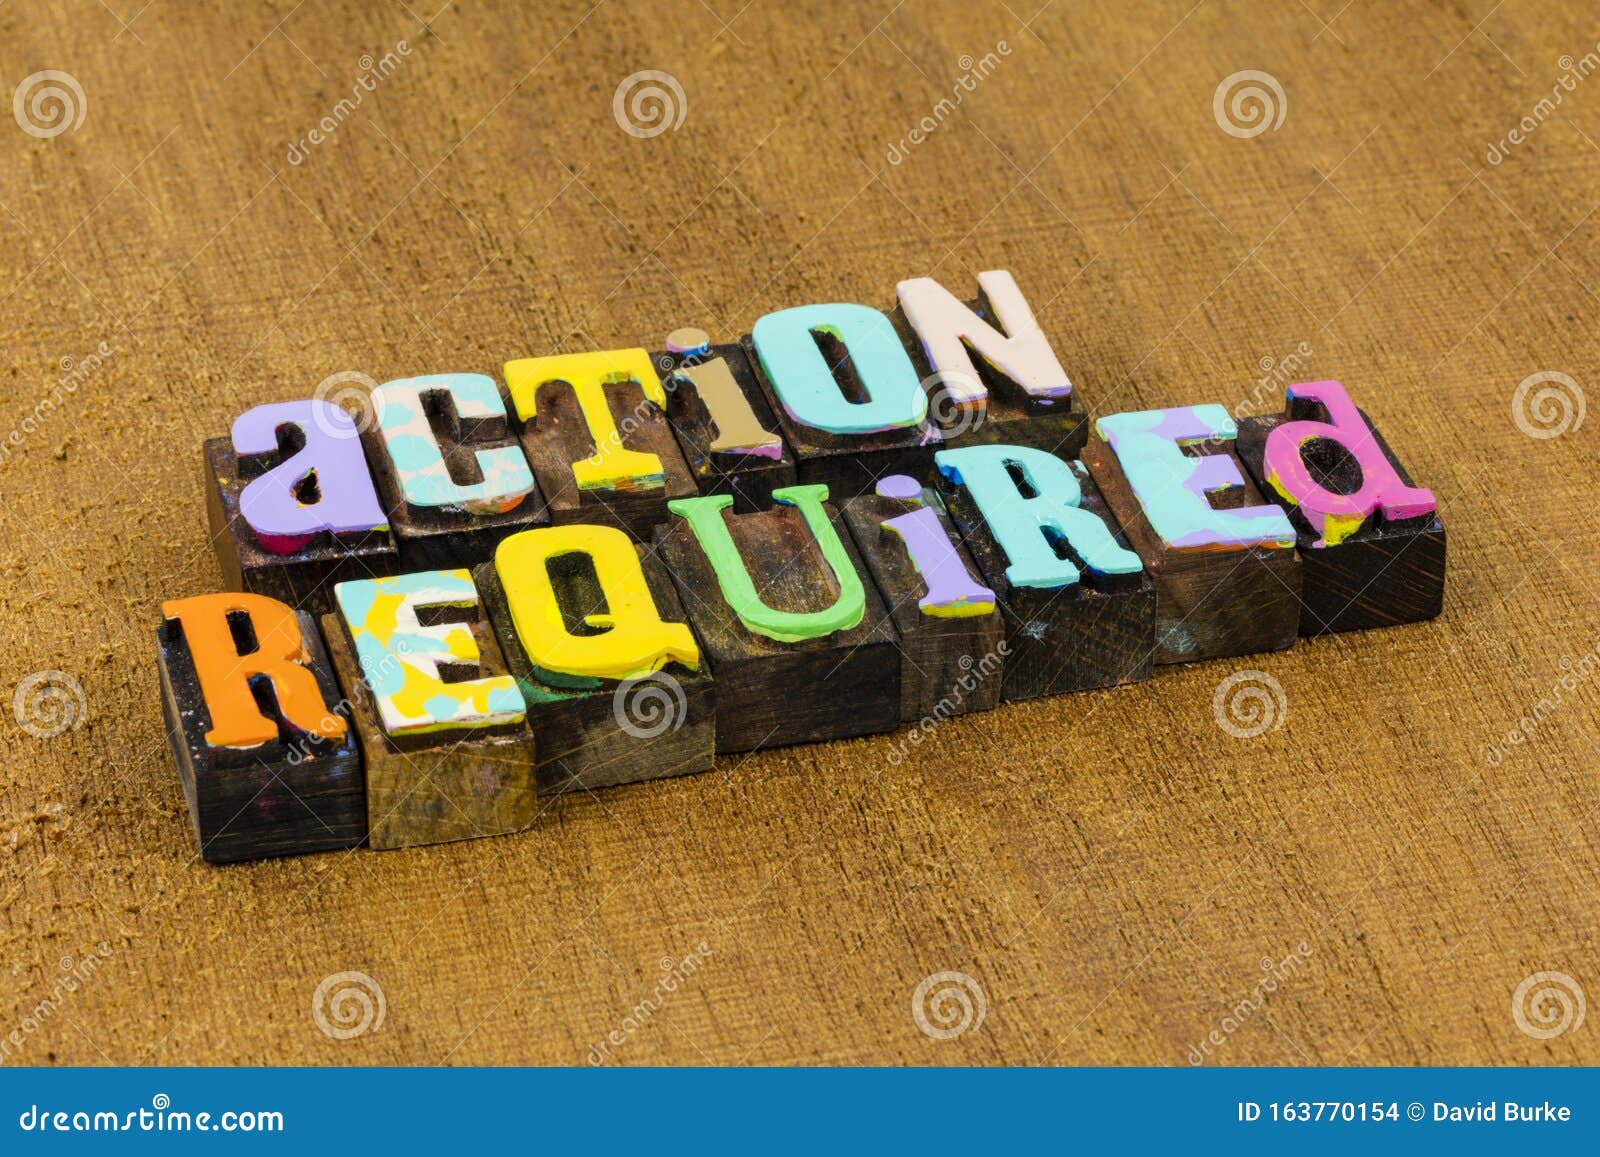 action required immediate attention necessary urgent important review